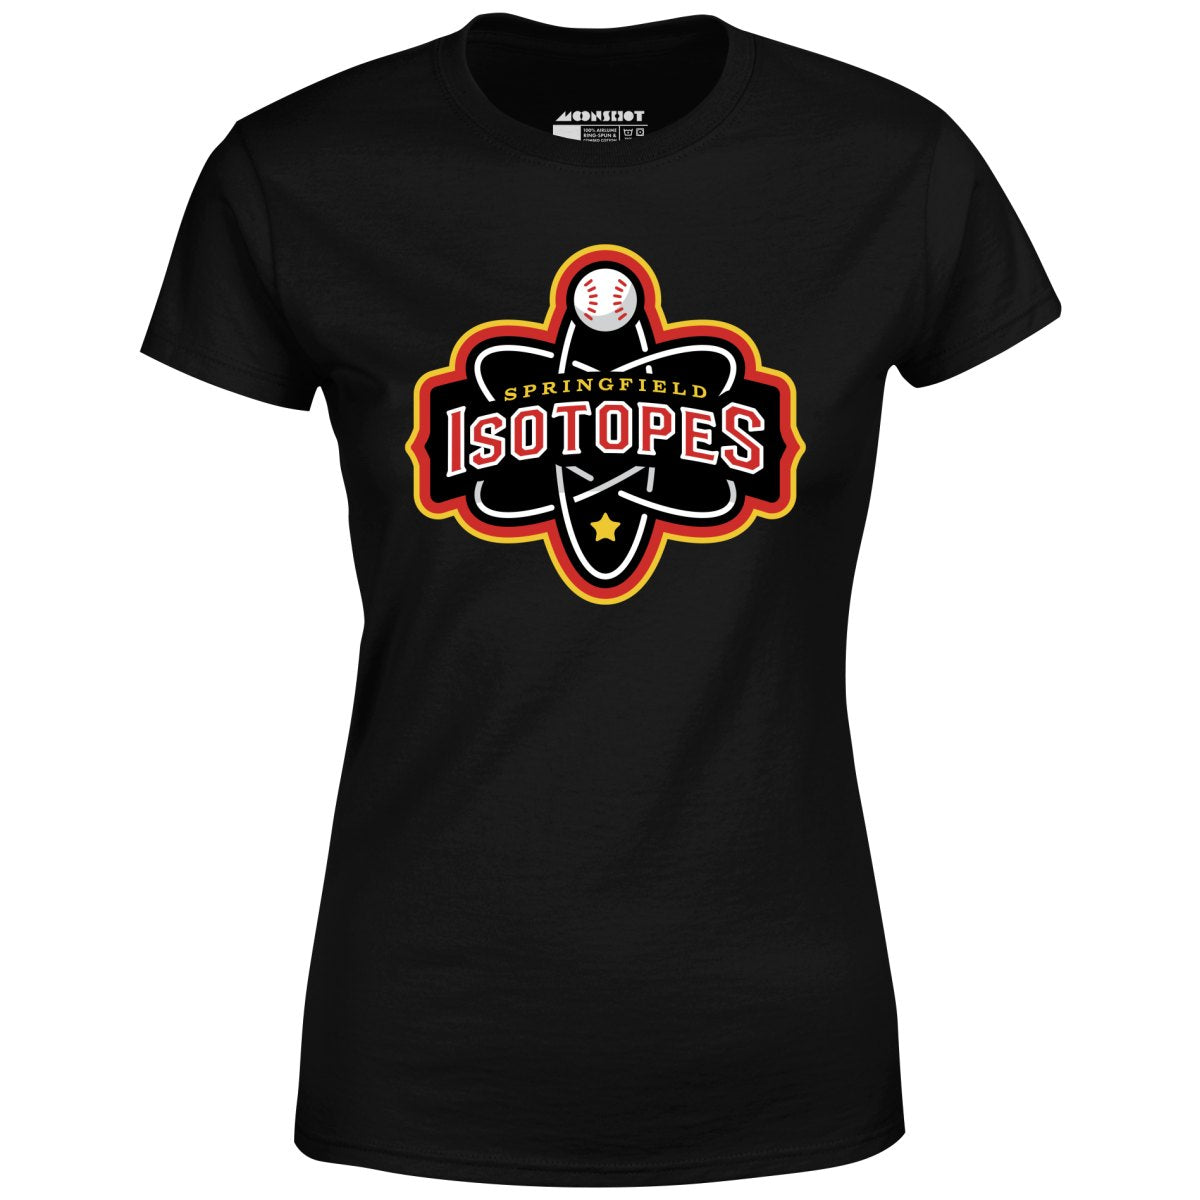 Springfield Isotopes - Women's T-Shirt